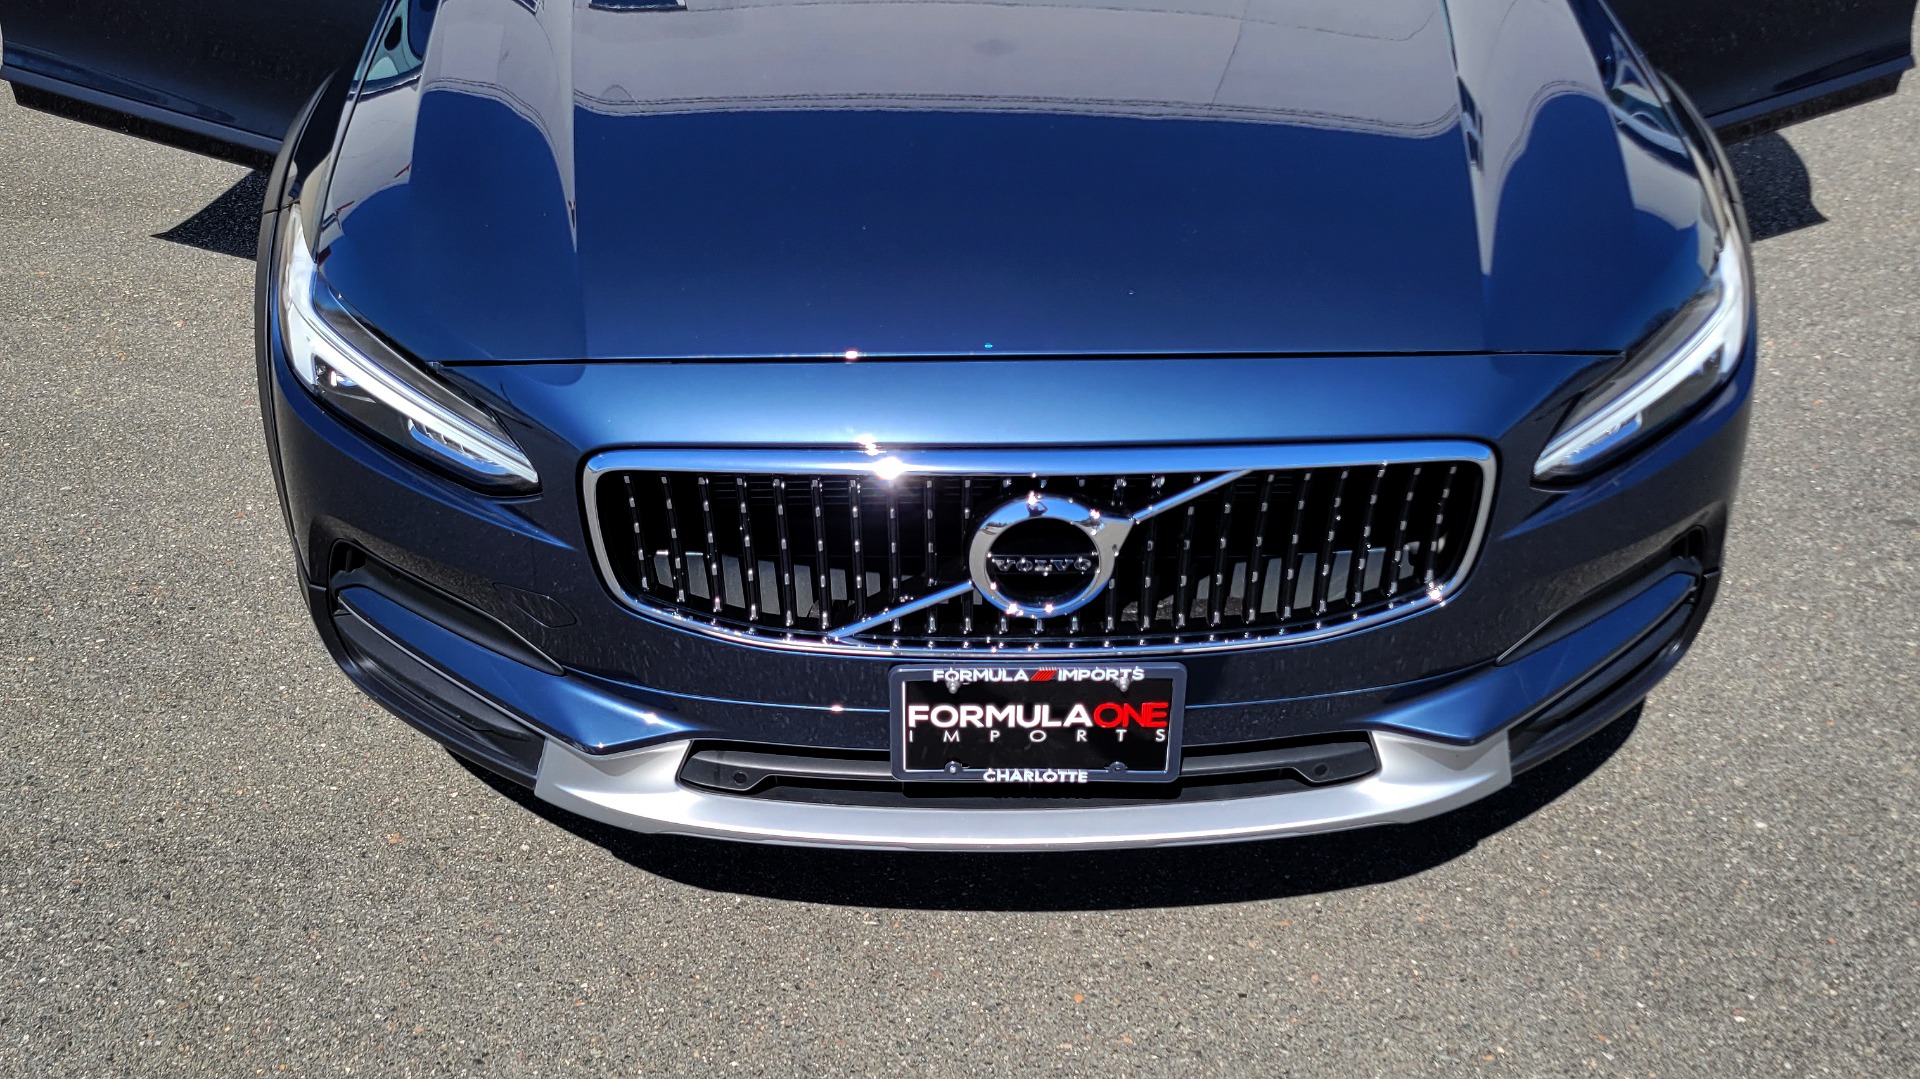 Used 2020 Volvo V90 CROSS COUNTRY T6 2.0L WAGON / AWD / HTD STS / PROTECTION PKG / REARVIEW for sale $55,000 at Formula Imports in Charlotte NC 28227 23